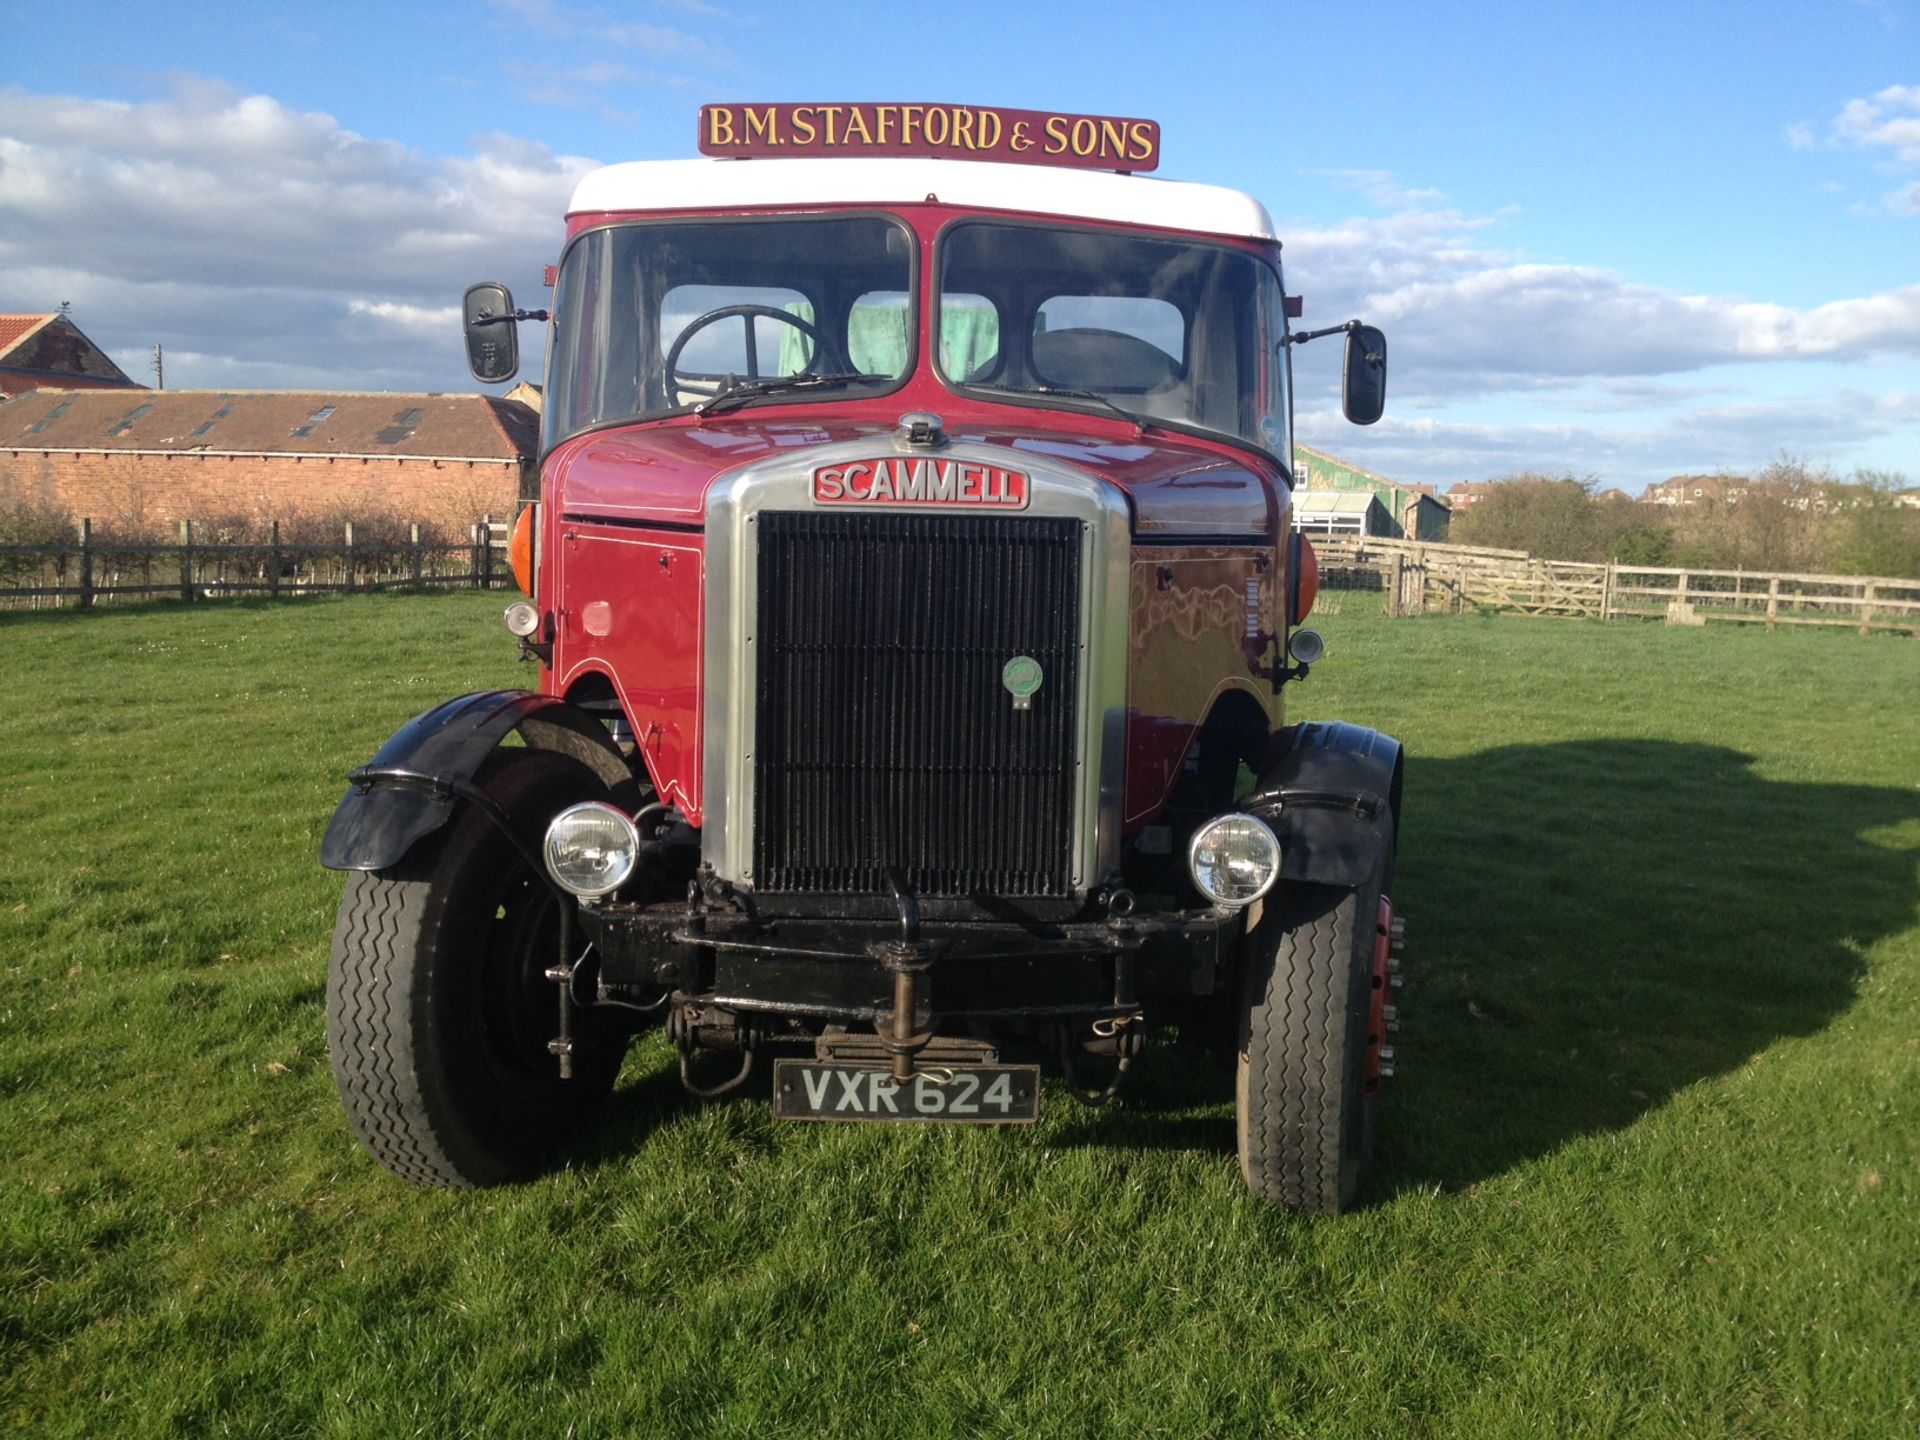 1958 Scammell MU17 ballast tractor fitted with 680 Leyland diesel engine.  Reg No. VXR 624 Chassis - Image 7 of 7